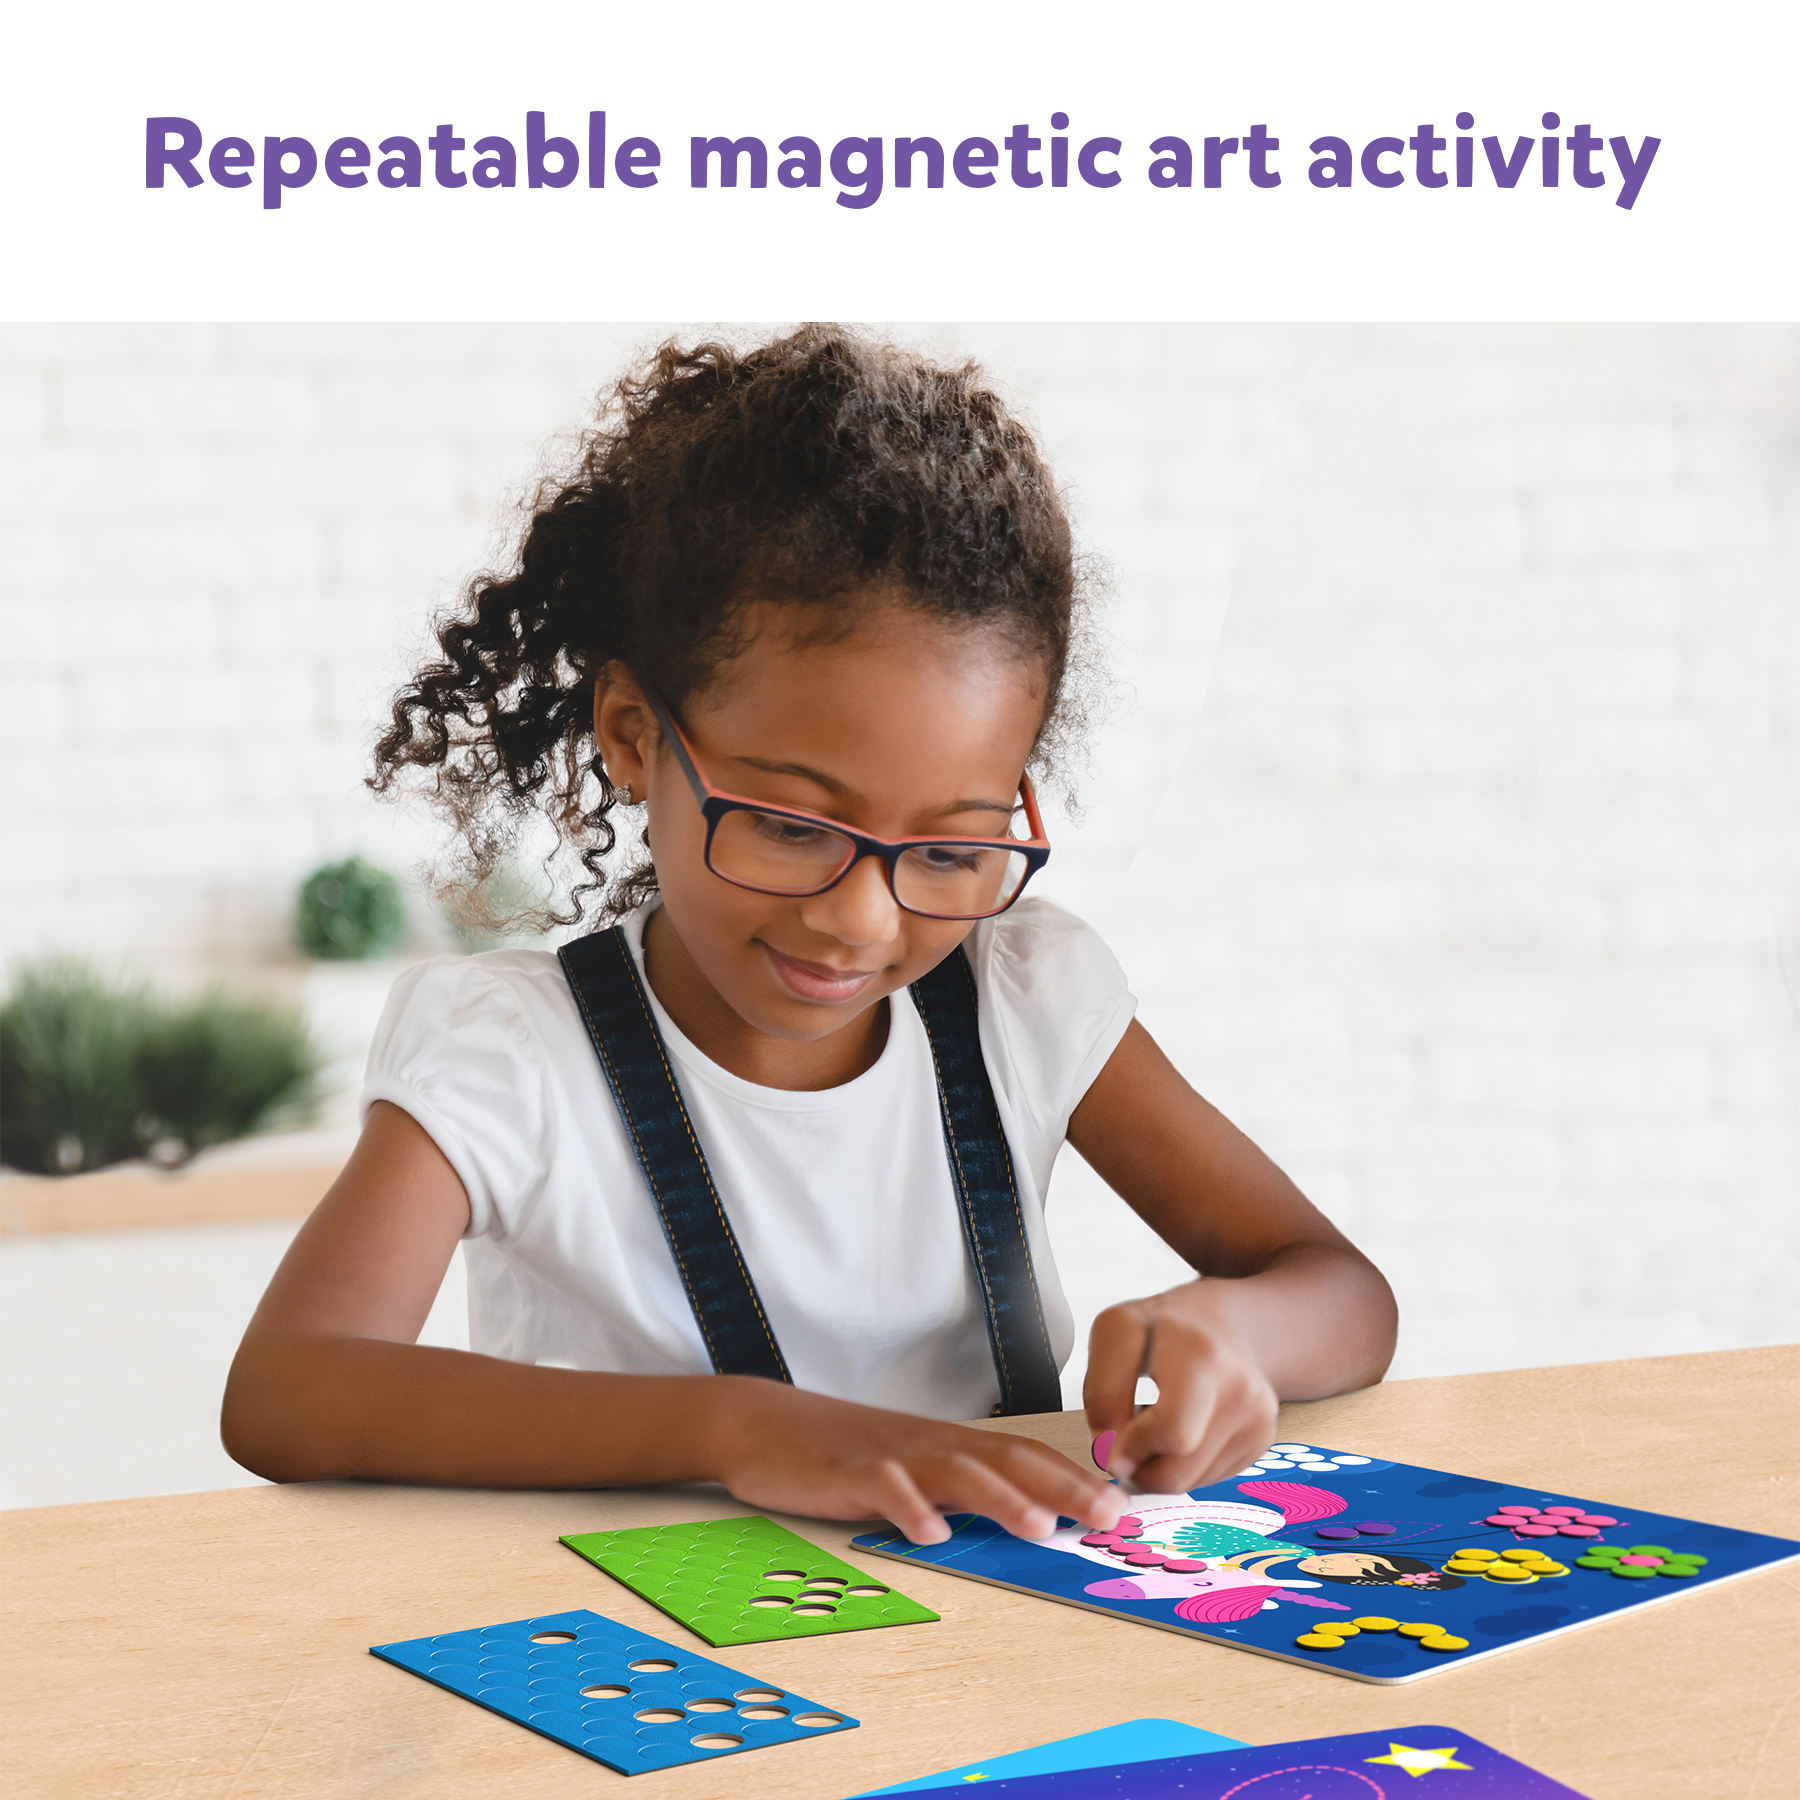 Skillmatics Art Activity Dot It with Magnets - Unicorns & Princesses, No Mess Repeatable Art for Kids, Craft Kits, DIY Activity, Gifts for Ages 4 to 7